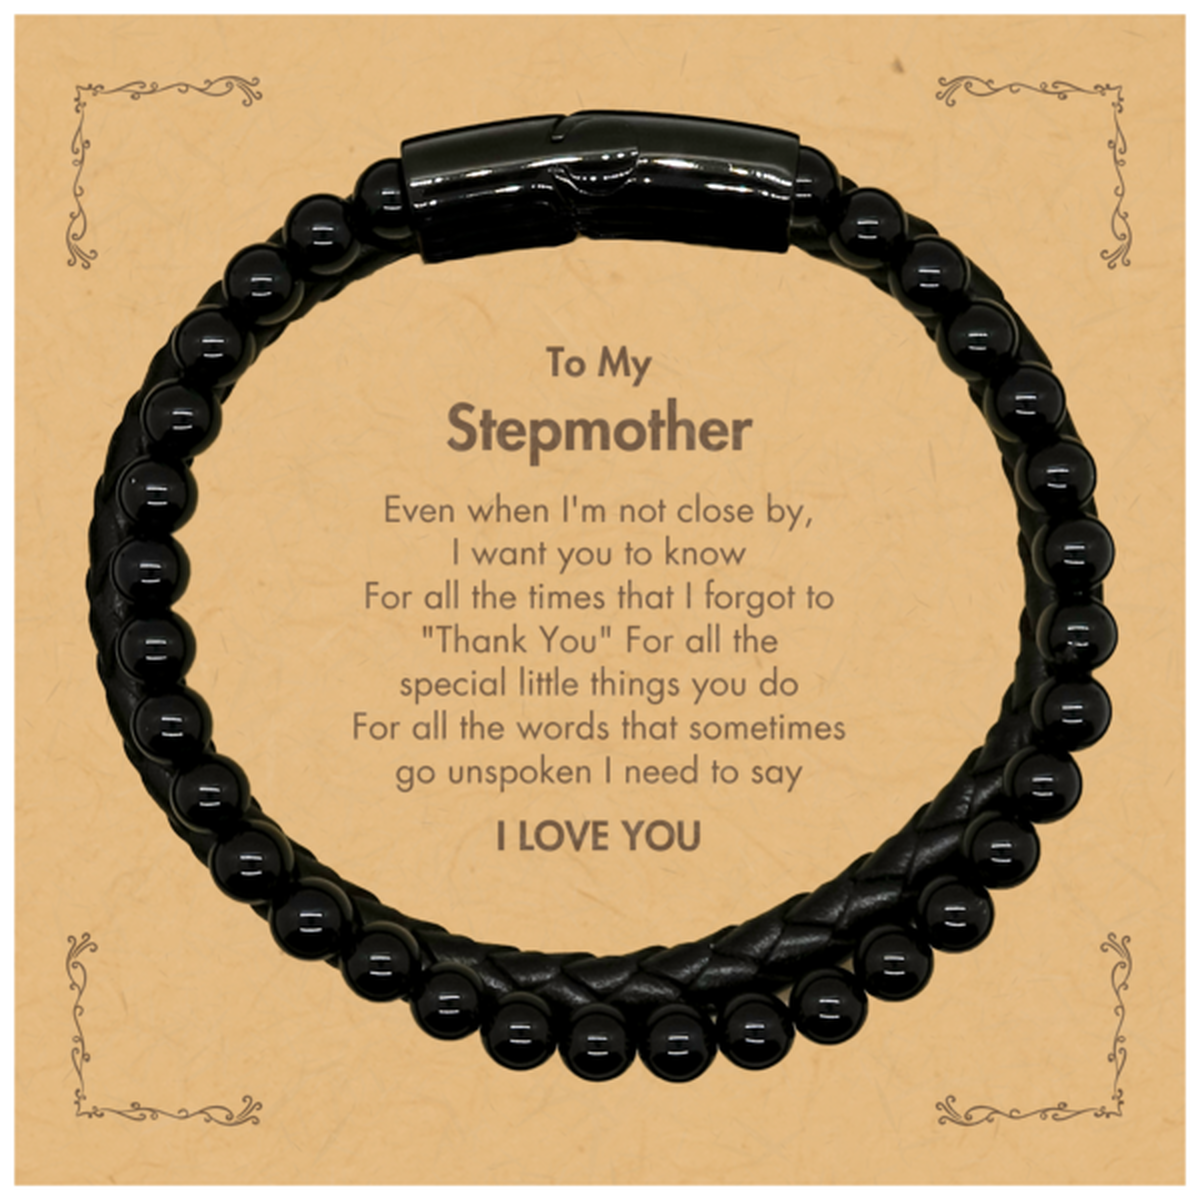 Thank You Gifts for Stepmother, Keepsake Stone Leather Bracelets Gifts for Stepmother Birthday Mother's day Father's Day Stepmother For all the words That sometimes go unspoken I need to say I LOVE YOU